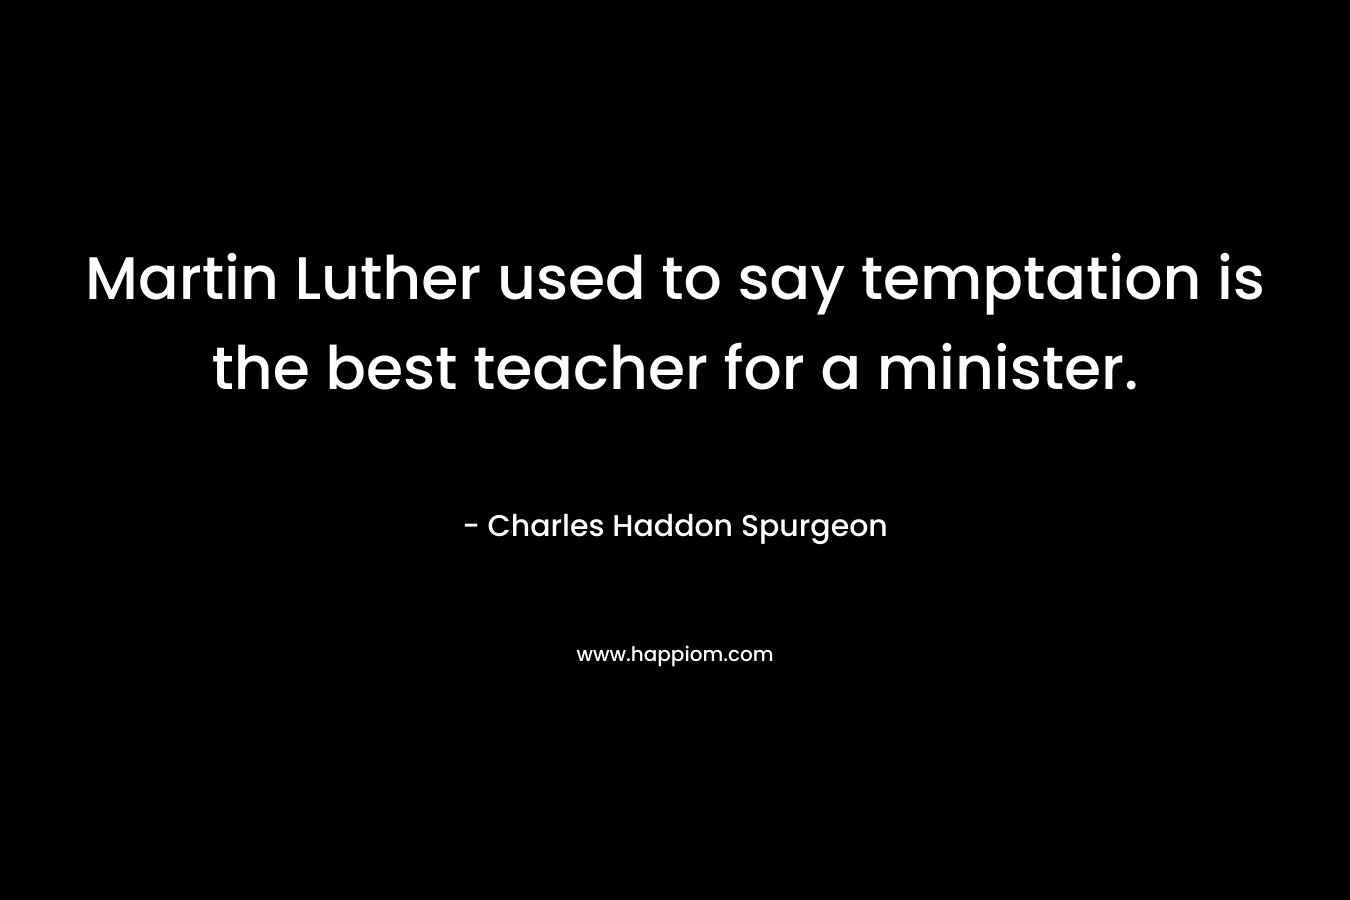 Martin Luther used to say temptation is the best teacher for a minister. – Charles Haddon Spurgeon